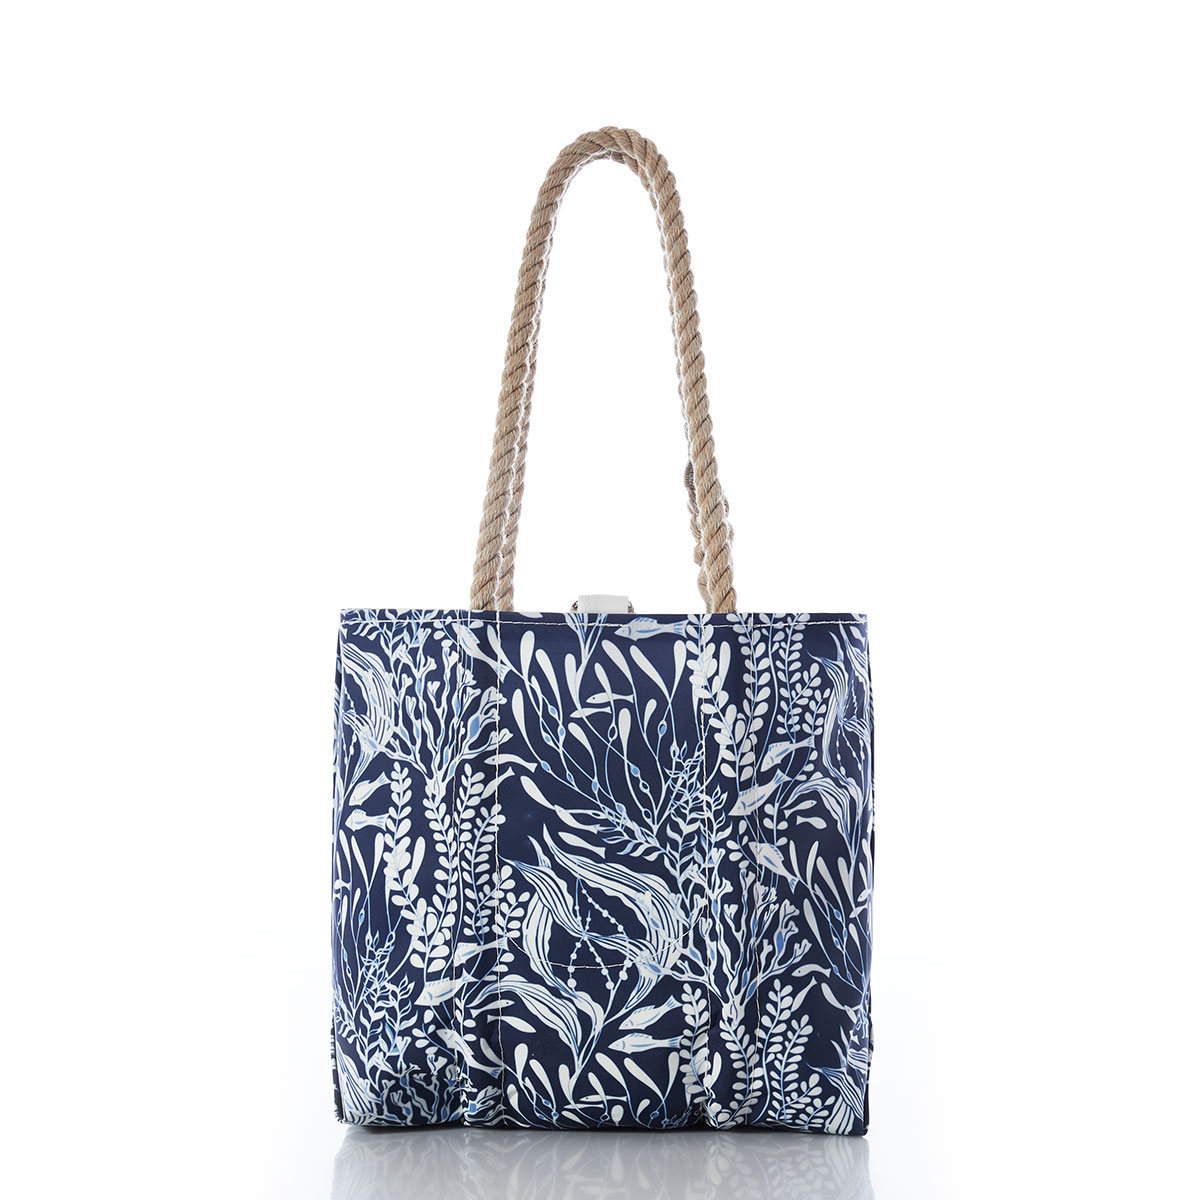 little fish swim among various types of seaweed in shades of navy and white on a recycled sail cloth handbag with hemp rope handles, back view